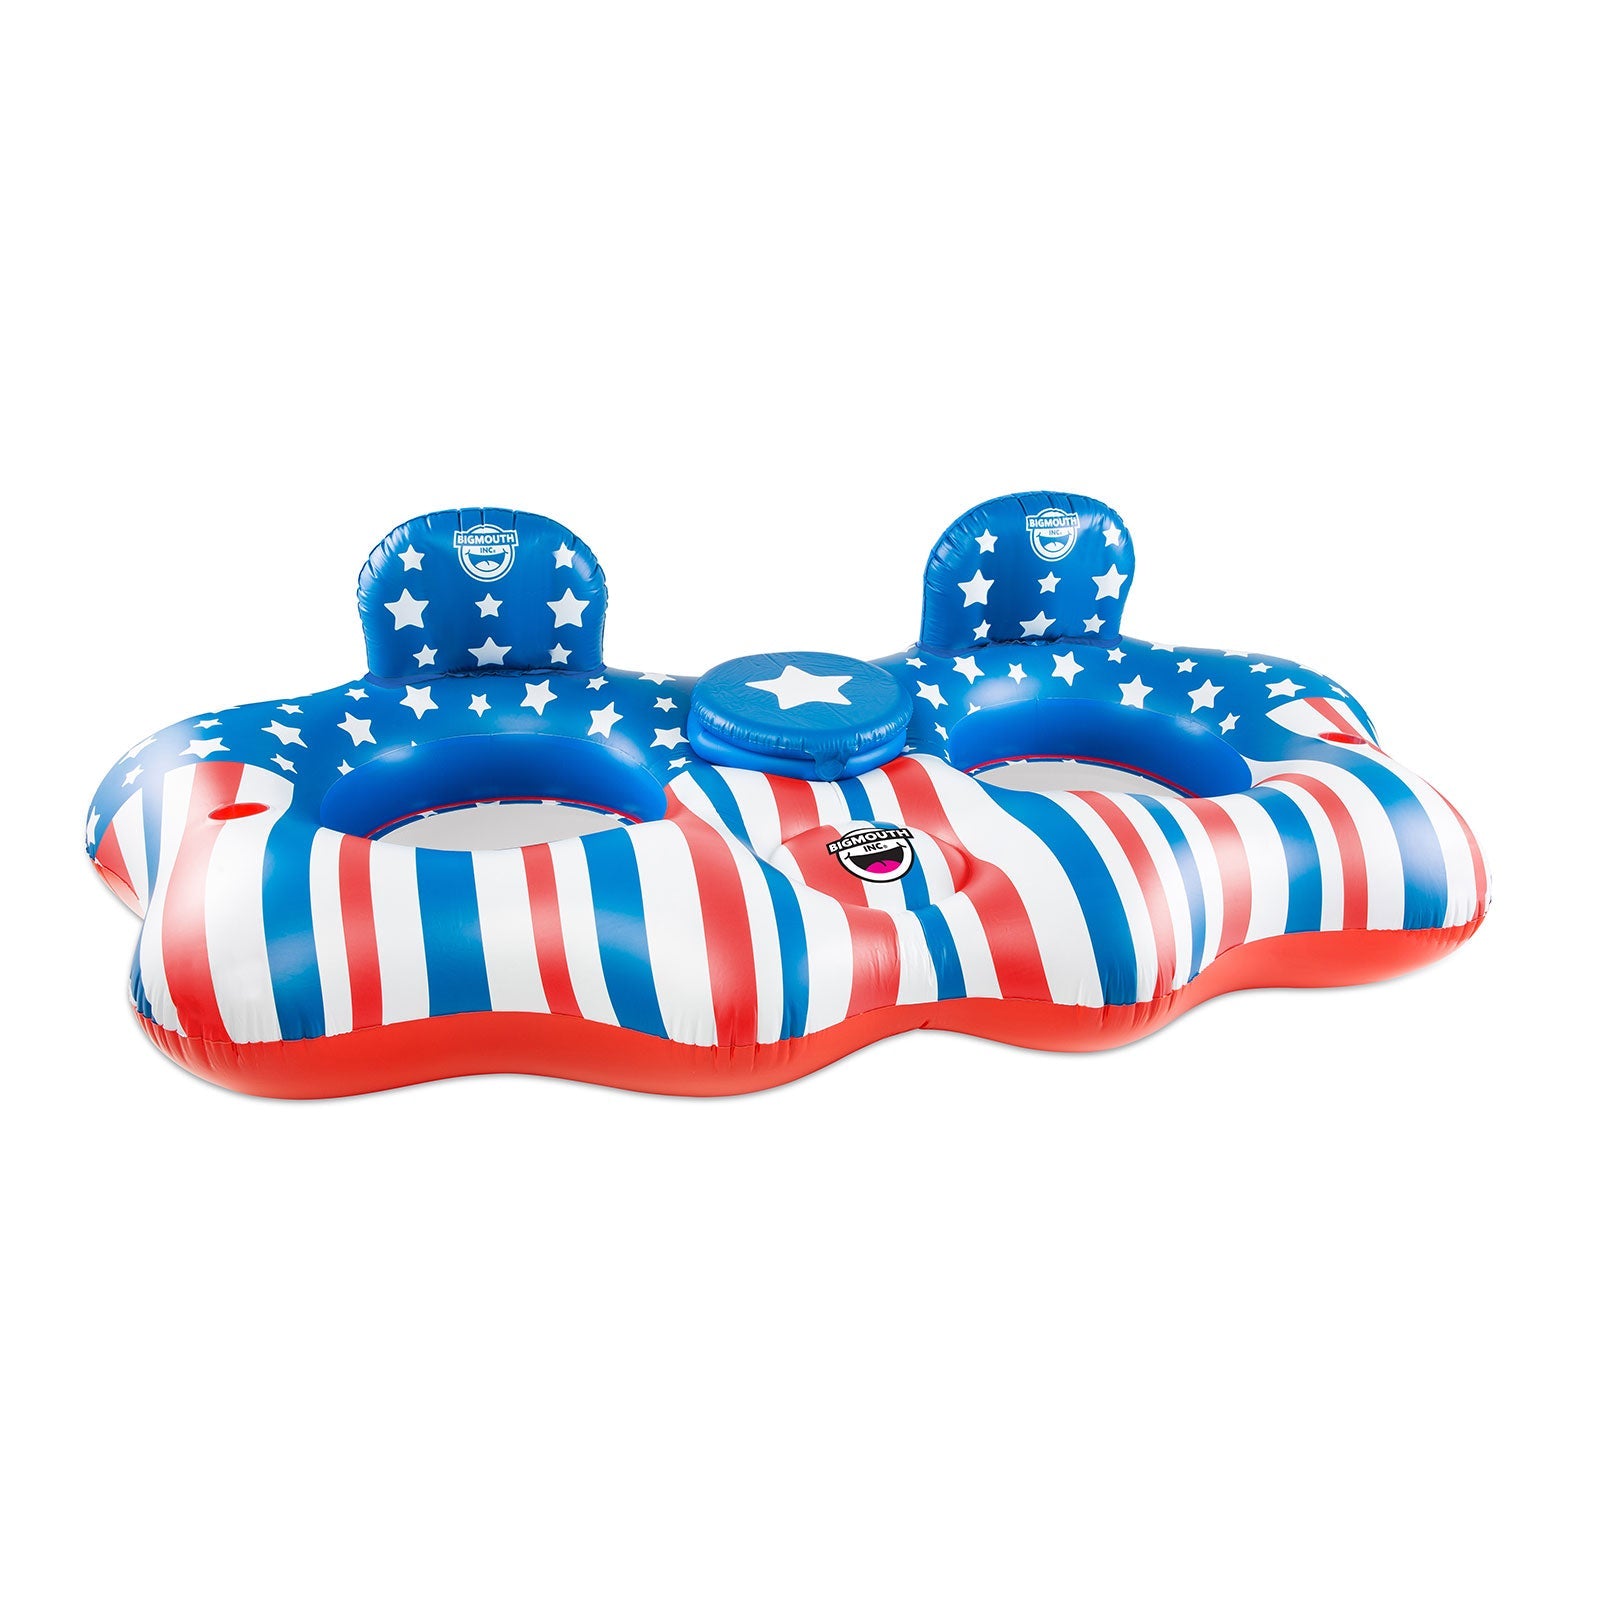 Americana River tube  Two-seater